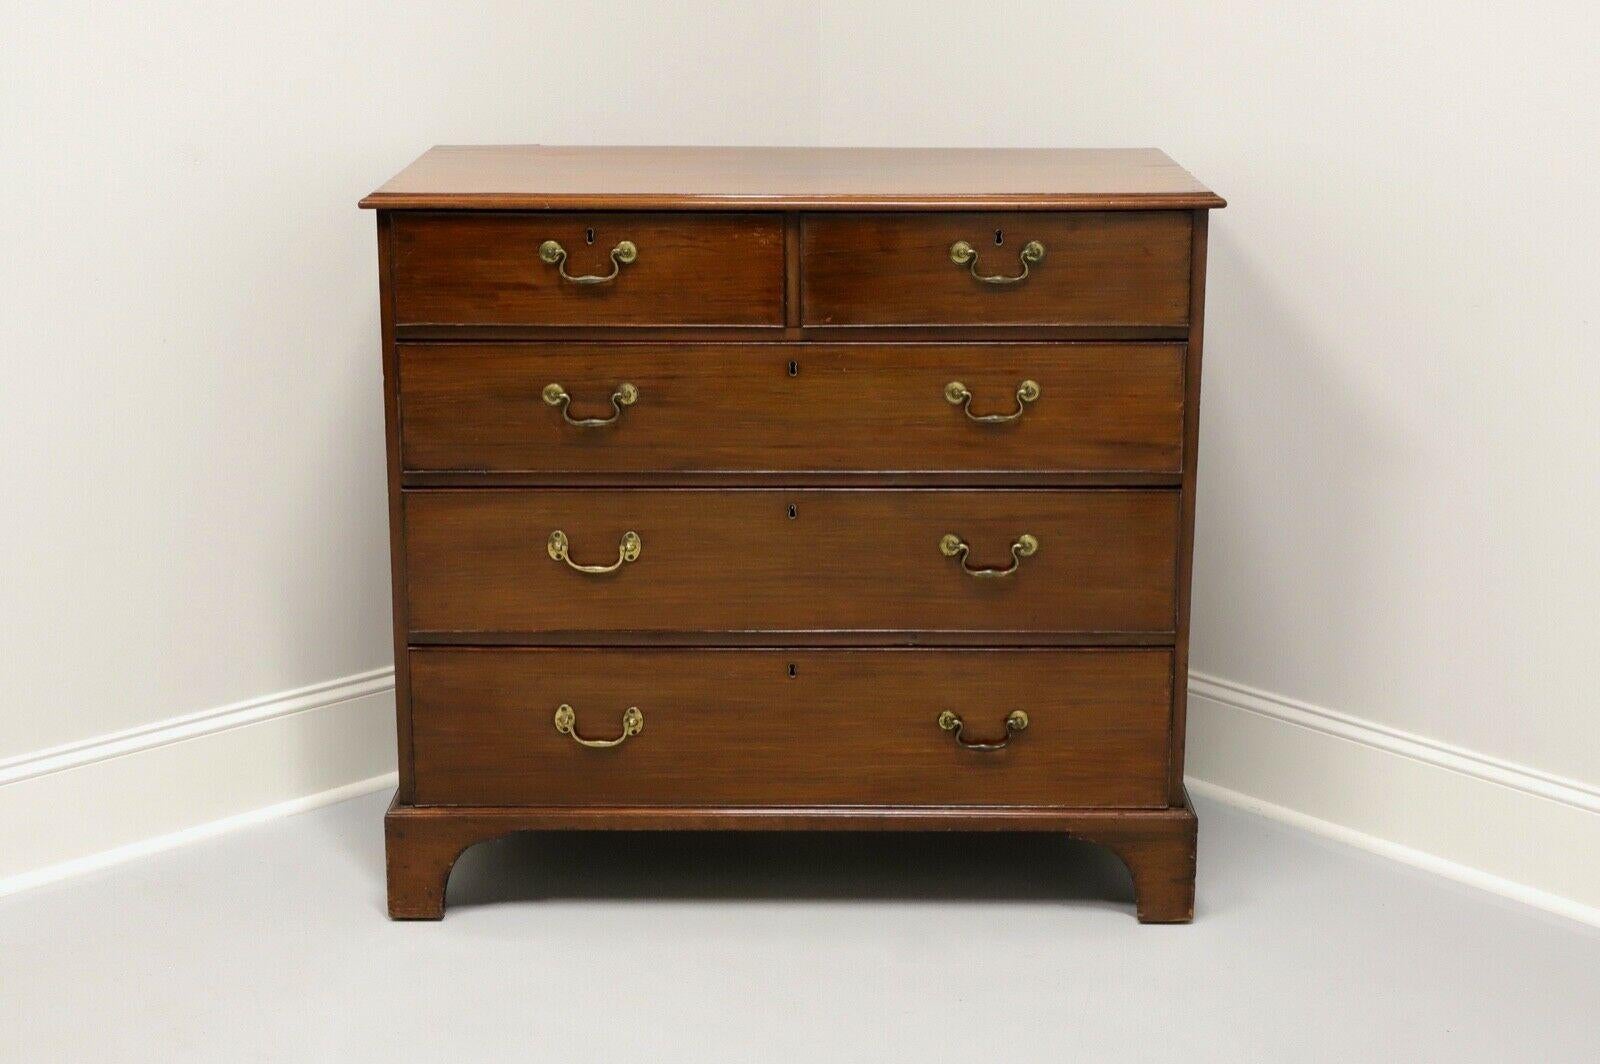 An antique Chippendale style chest of drawers, unbranded. Mahogany construction with brass hardware and bracket feet. Two smaller over three larger dovetail drawers with cockbead and brass hardware. No key for locks. Left side hardware on lower two